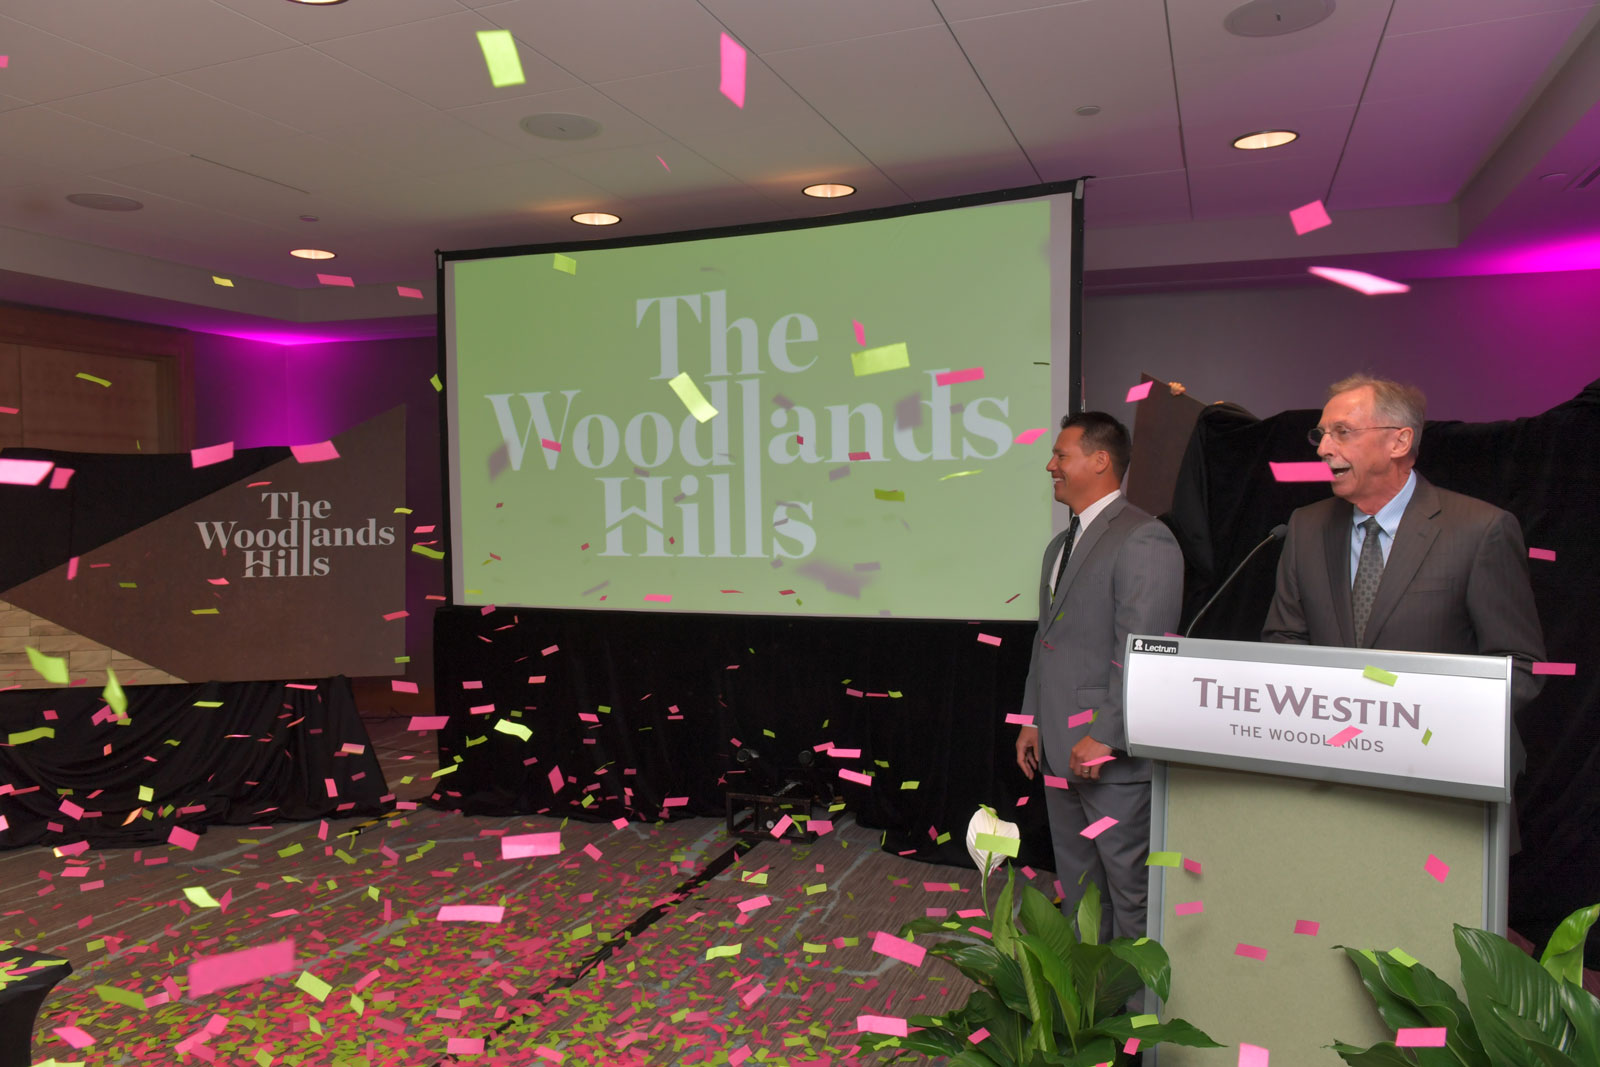 The Woodlands Hills, Houston’s Newest Master Planned Community